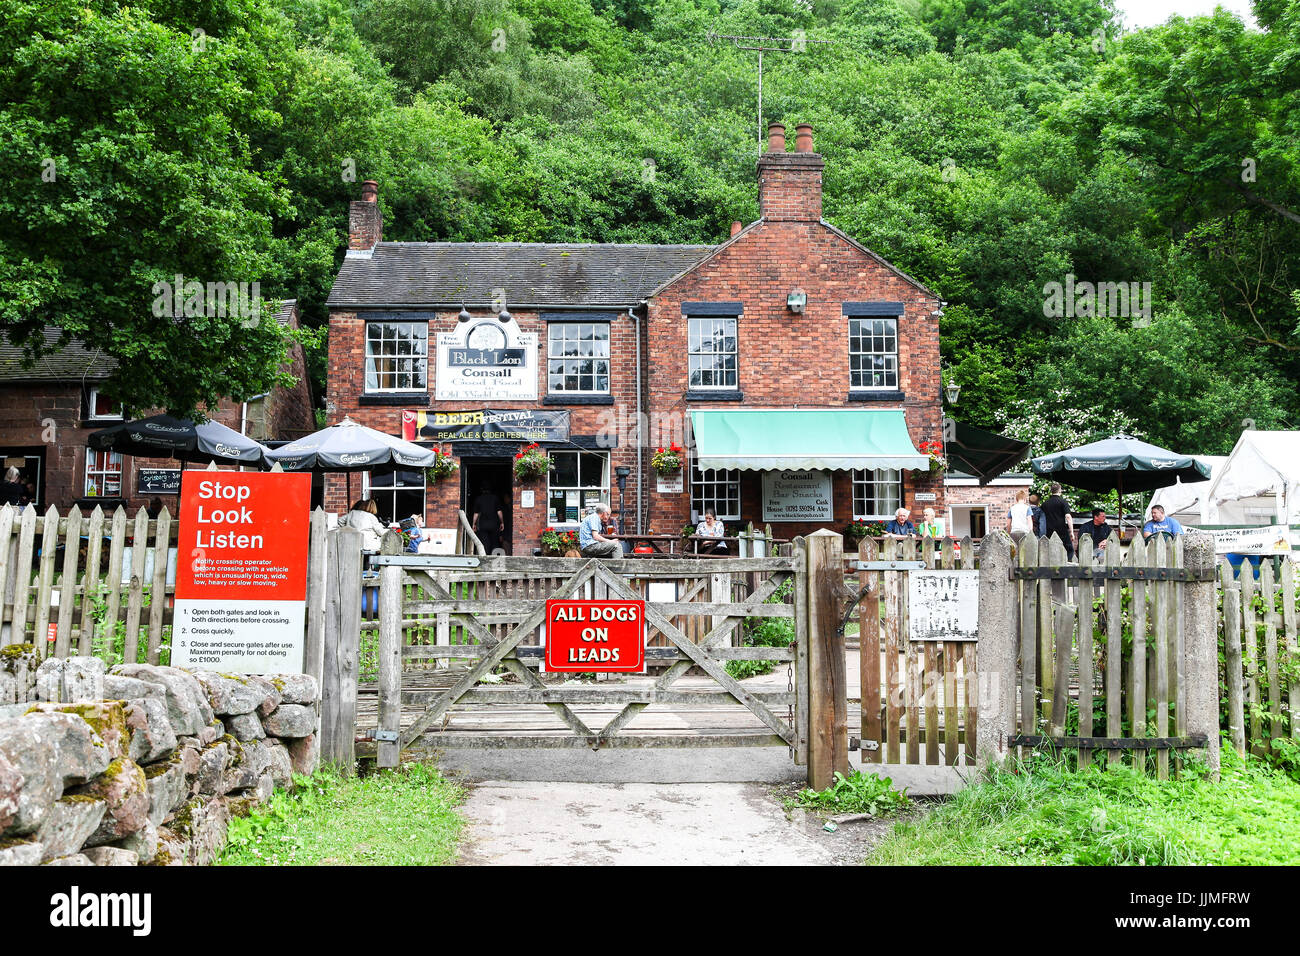 Black Lion public house at Consall, there are no public roads leading to it. Access is on foot, via the canal towpath, or the Churnet Valley railway Stock Photo